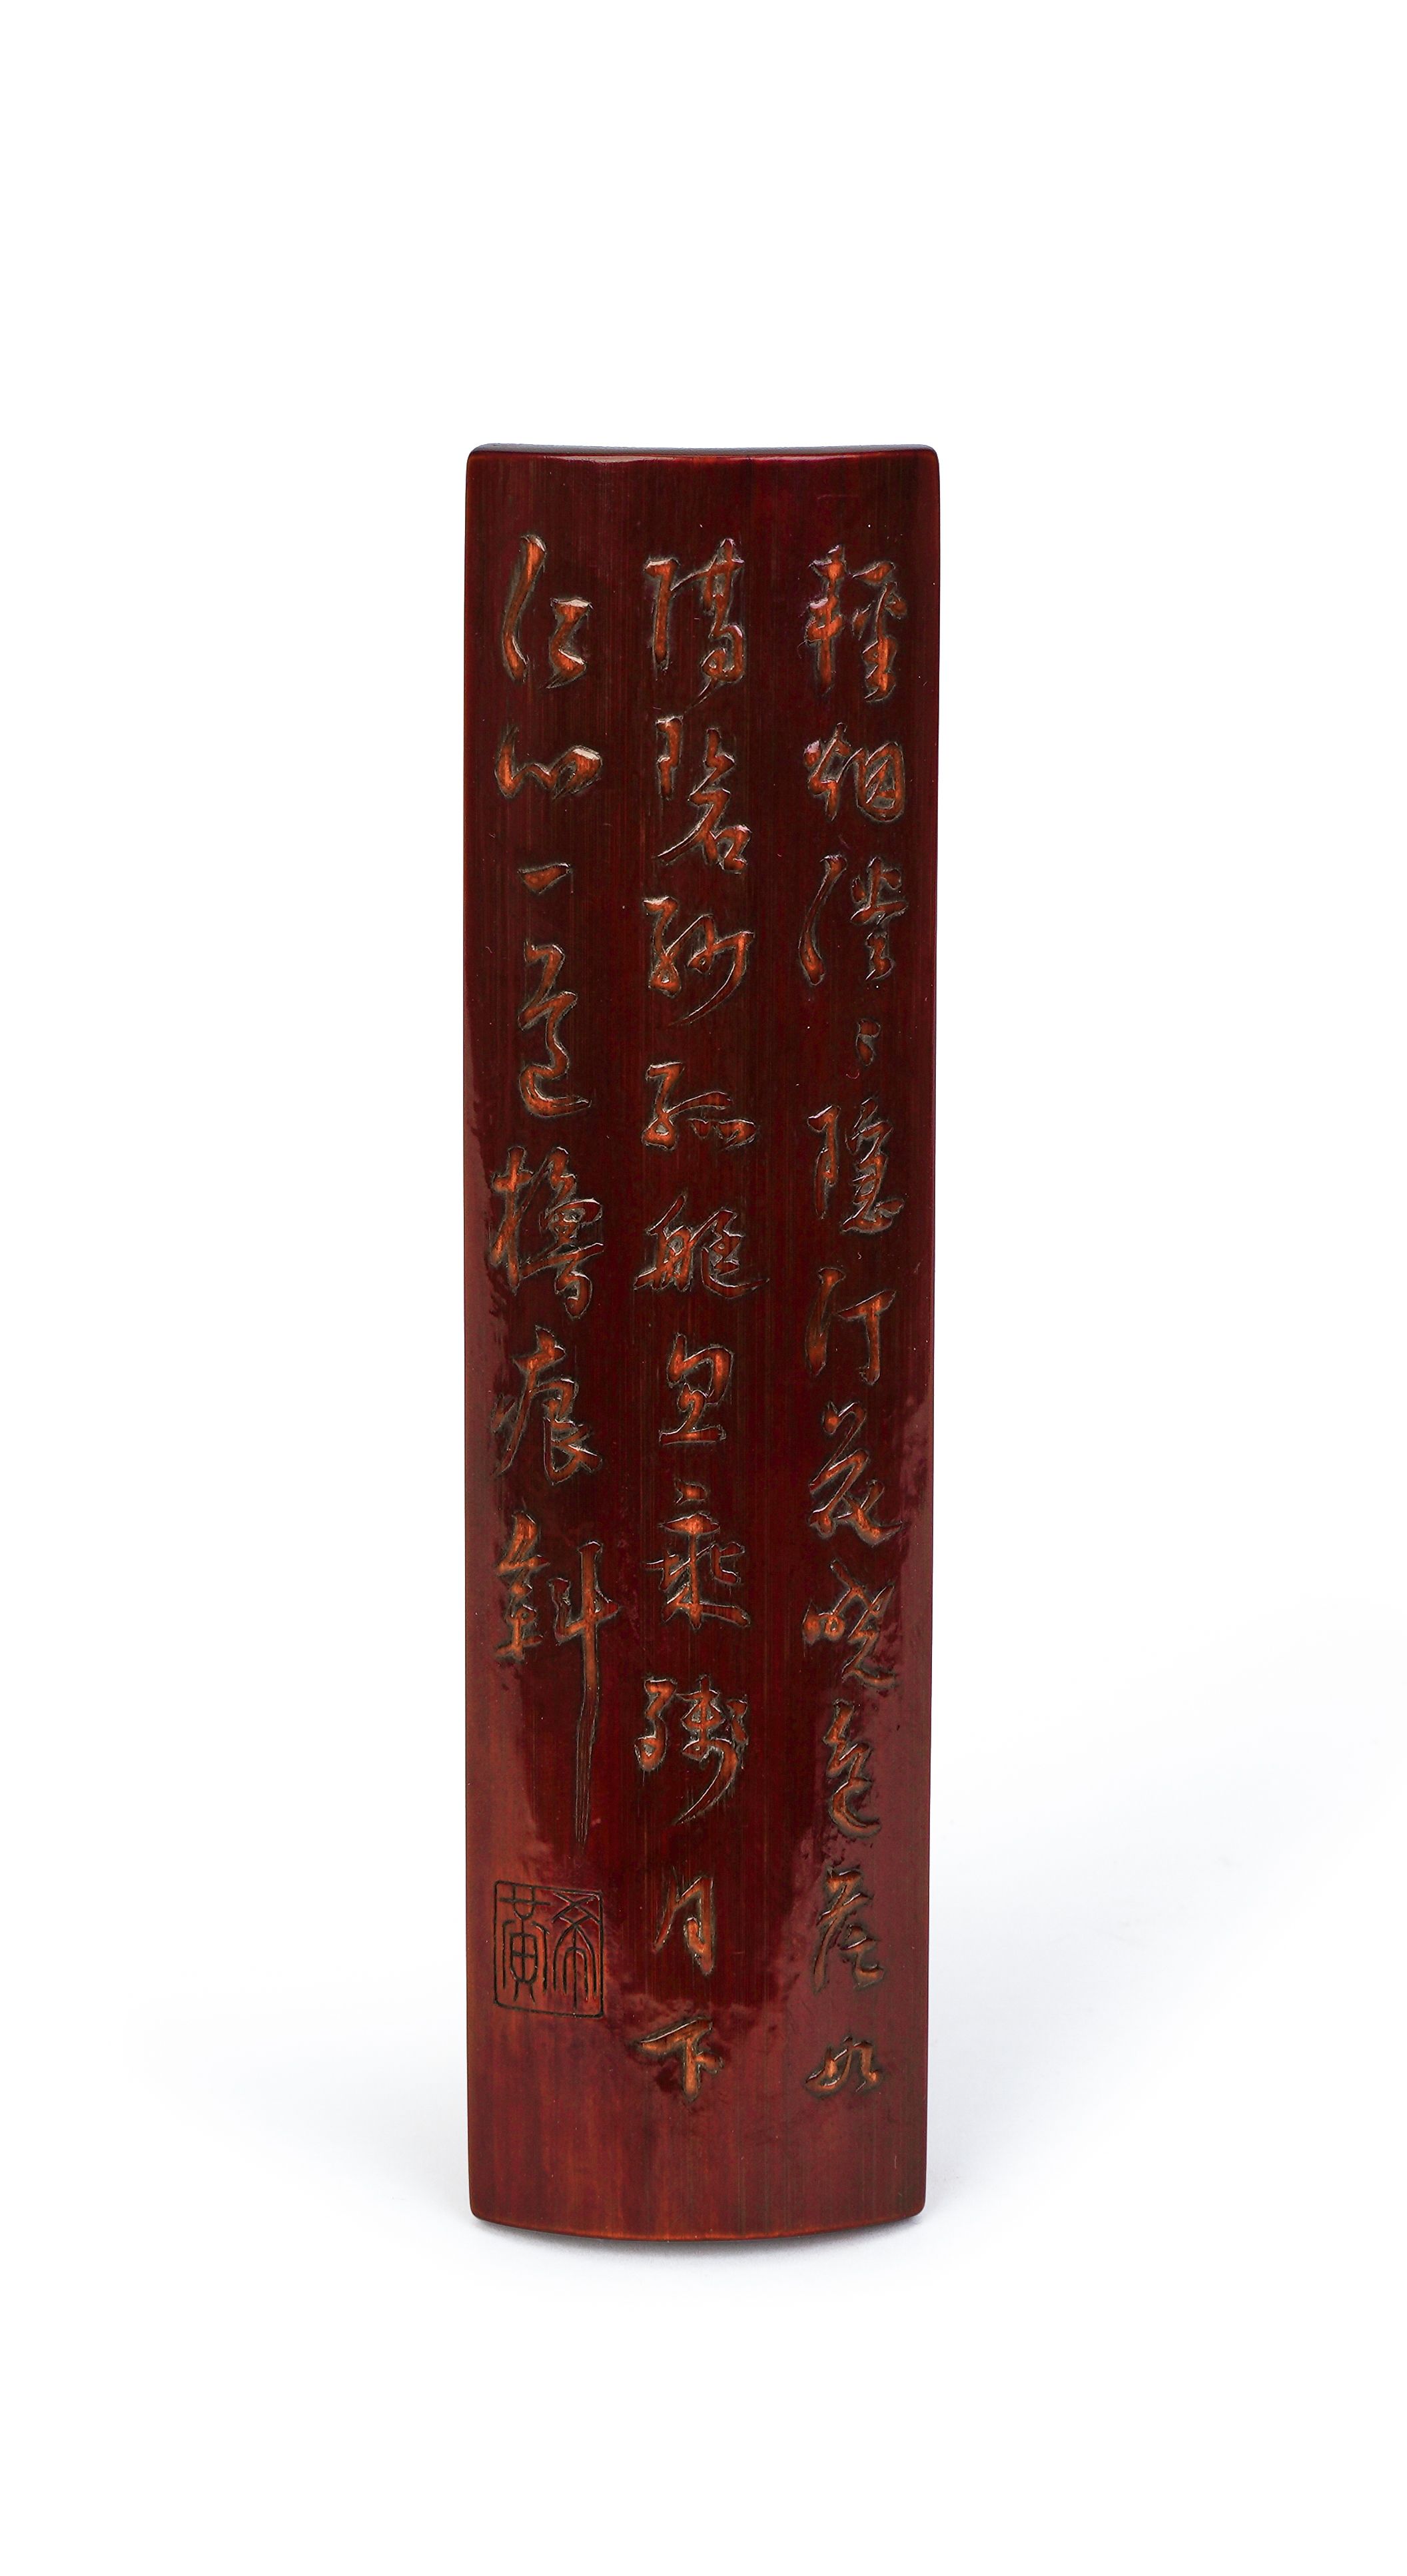 AN INSCRIBED CHINESE BAMBOO BRUSH REST, 17TH CENTURY, KANGXI PERIOD (1662-1722)